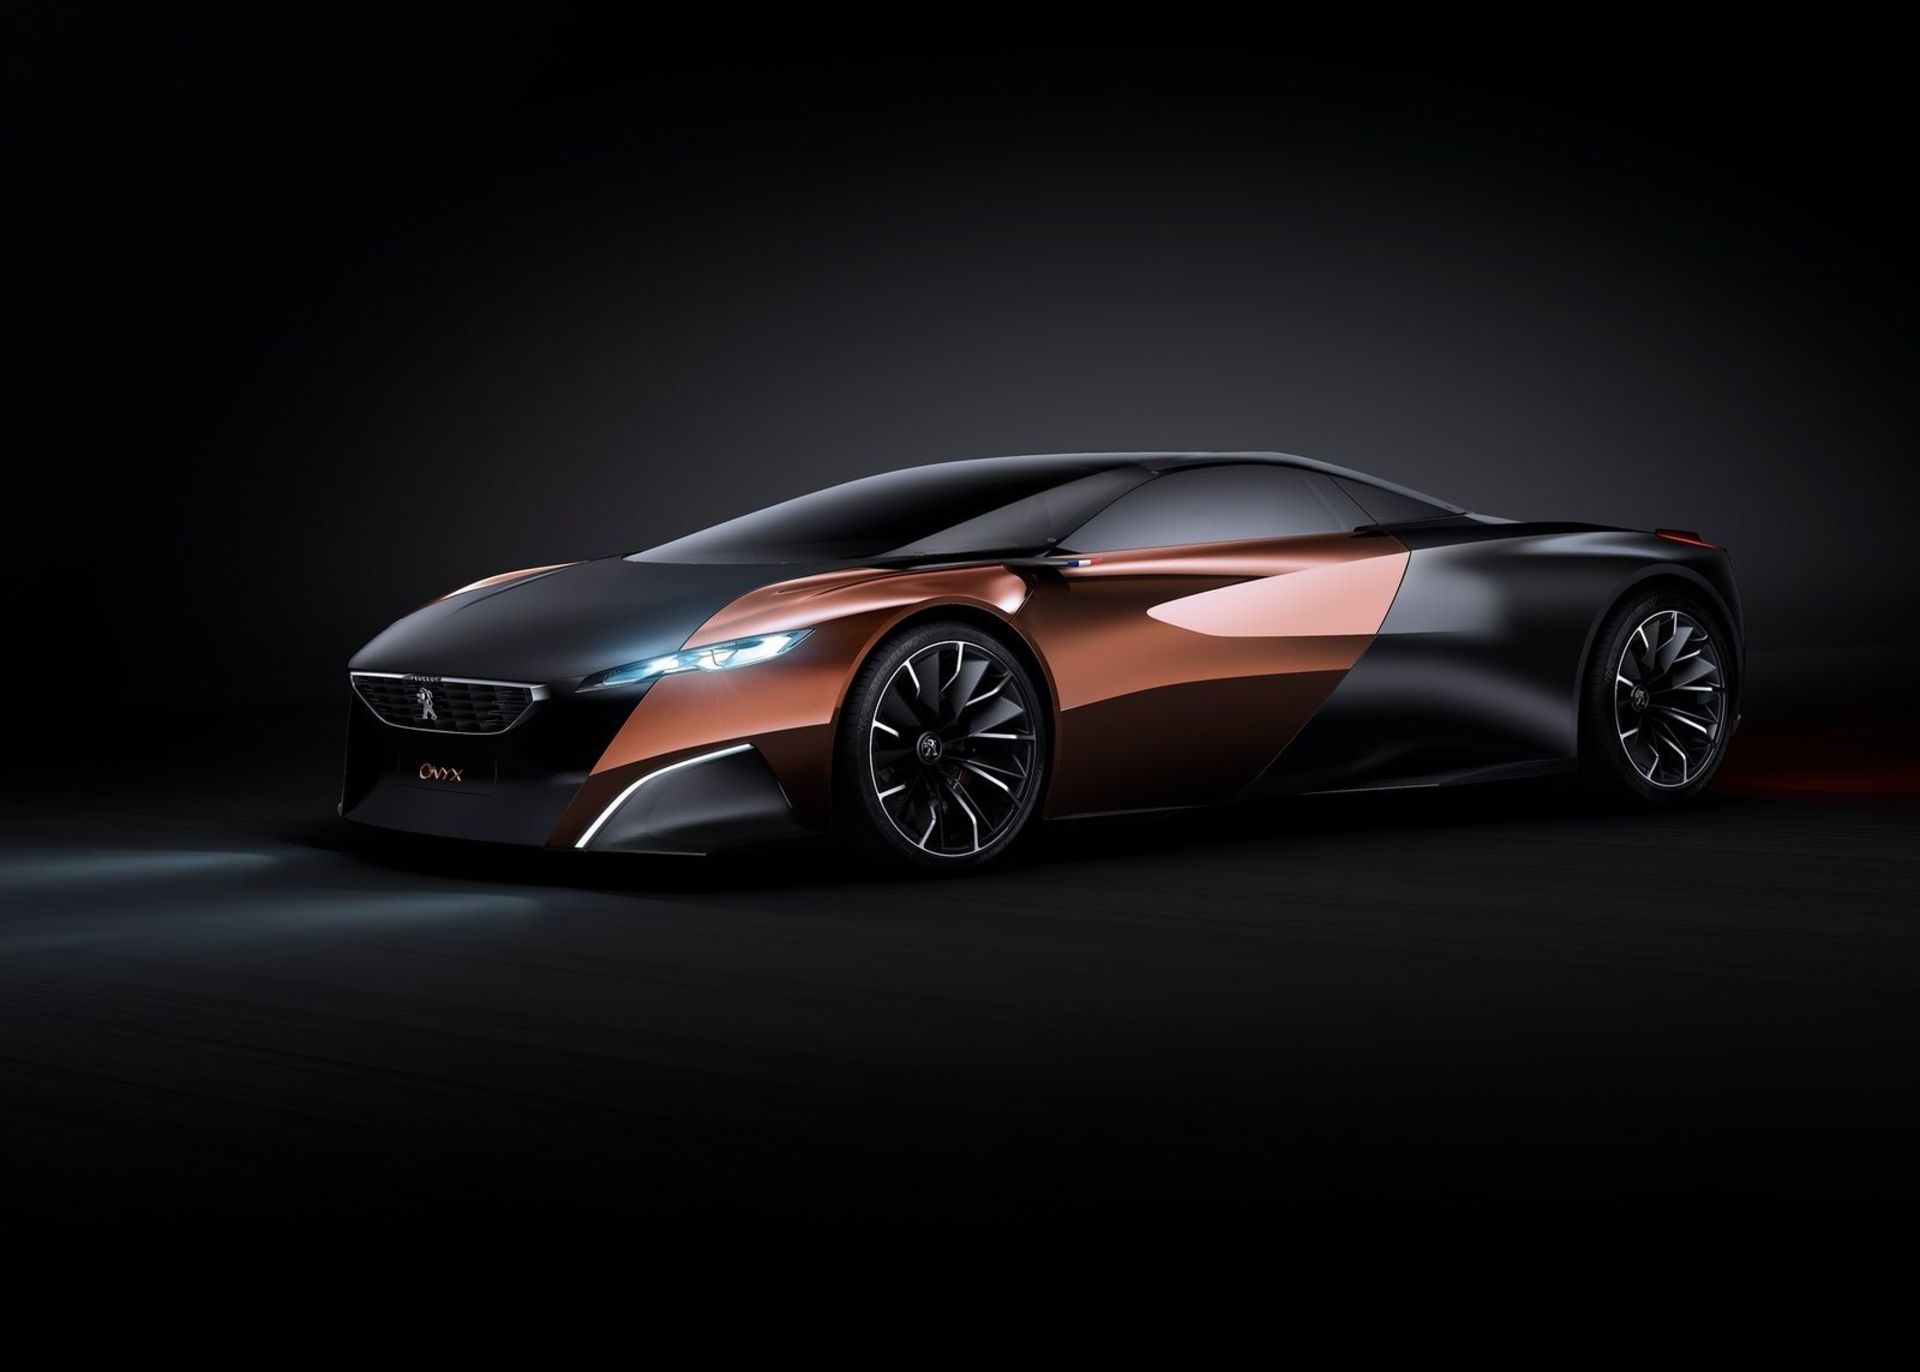  Peugeot Concept Hypercar ابرخودرو مفهومی پژو